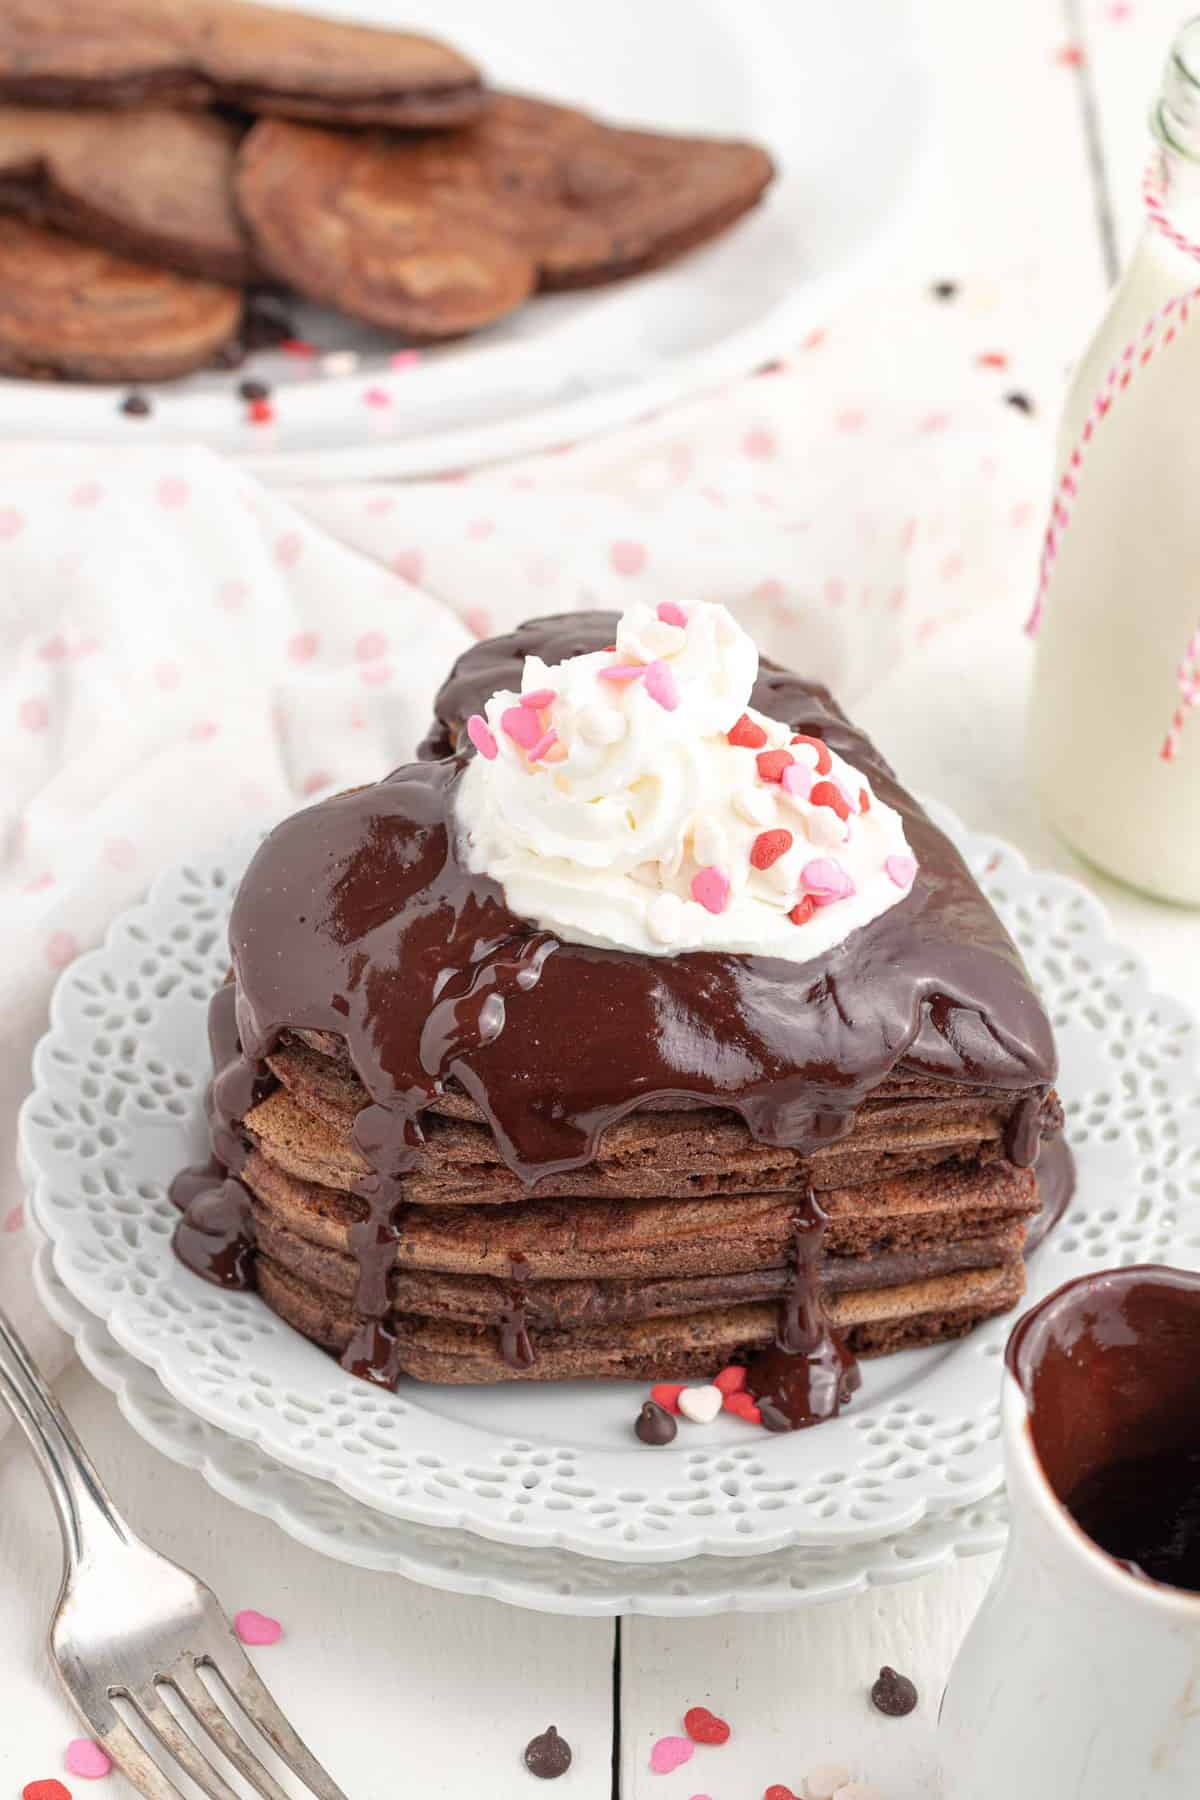 Stack of pancakes in the shape of a heart, with whipped cream and sprinkles.